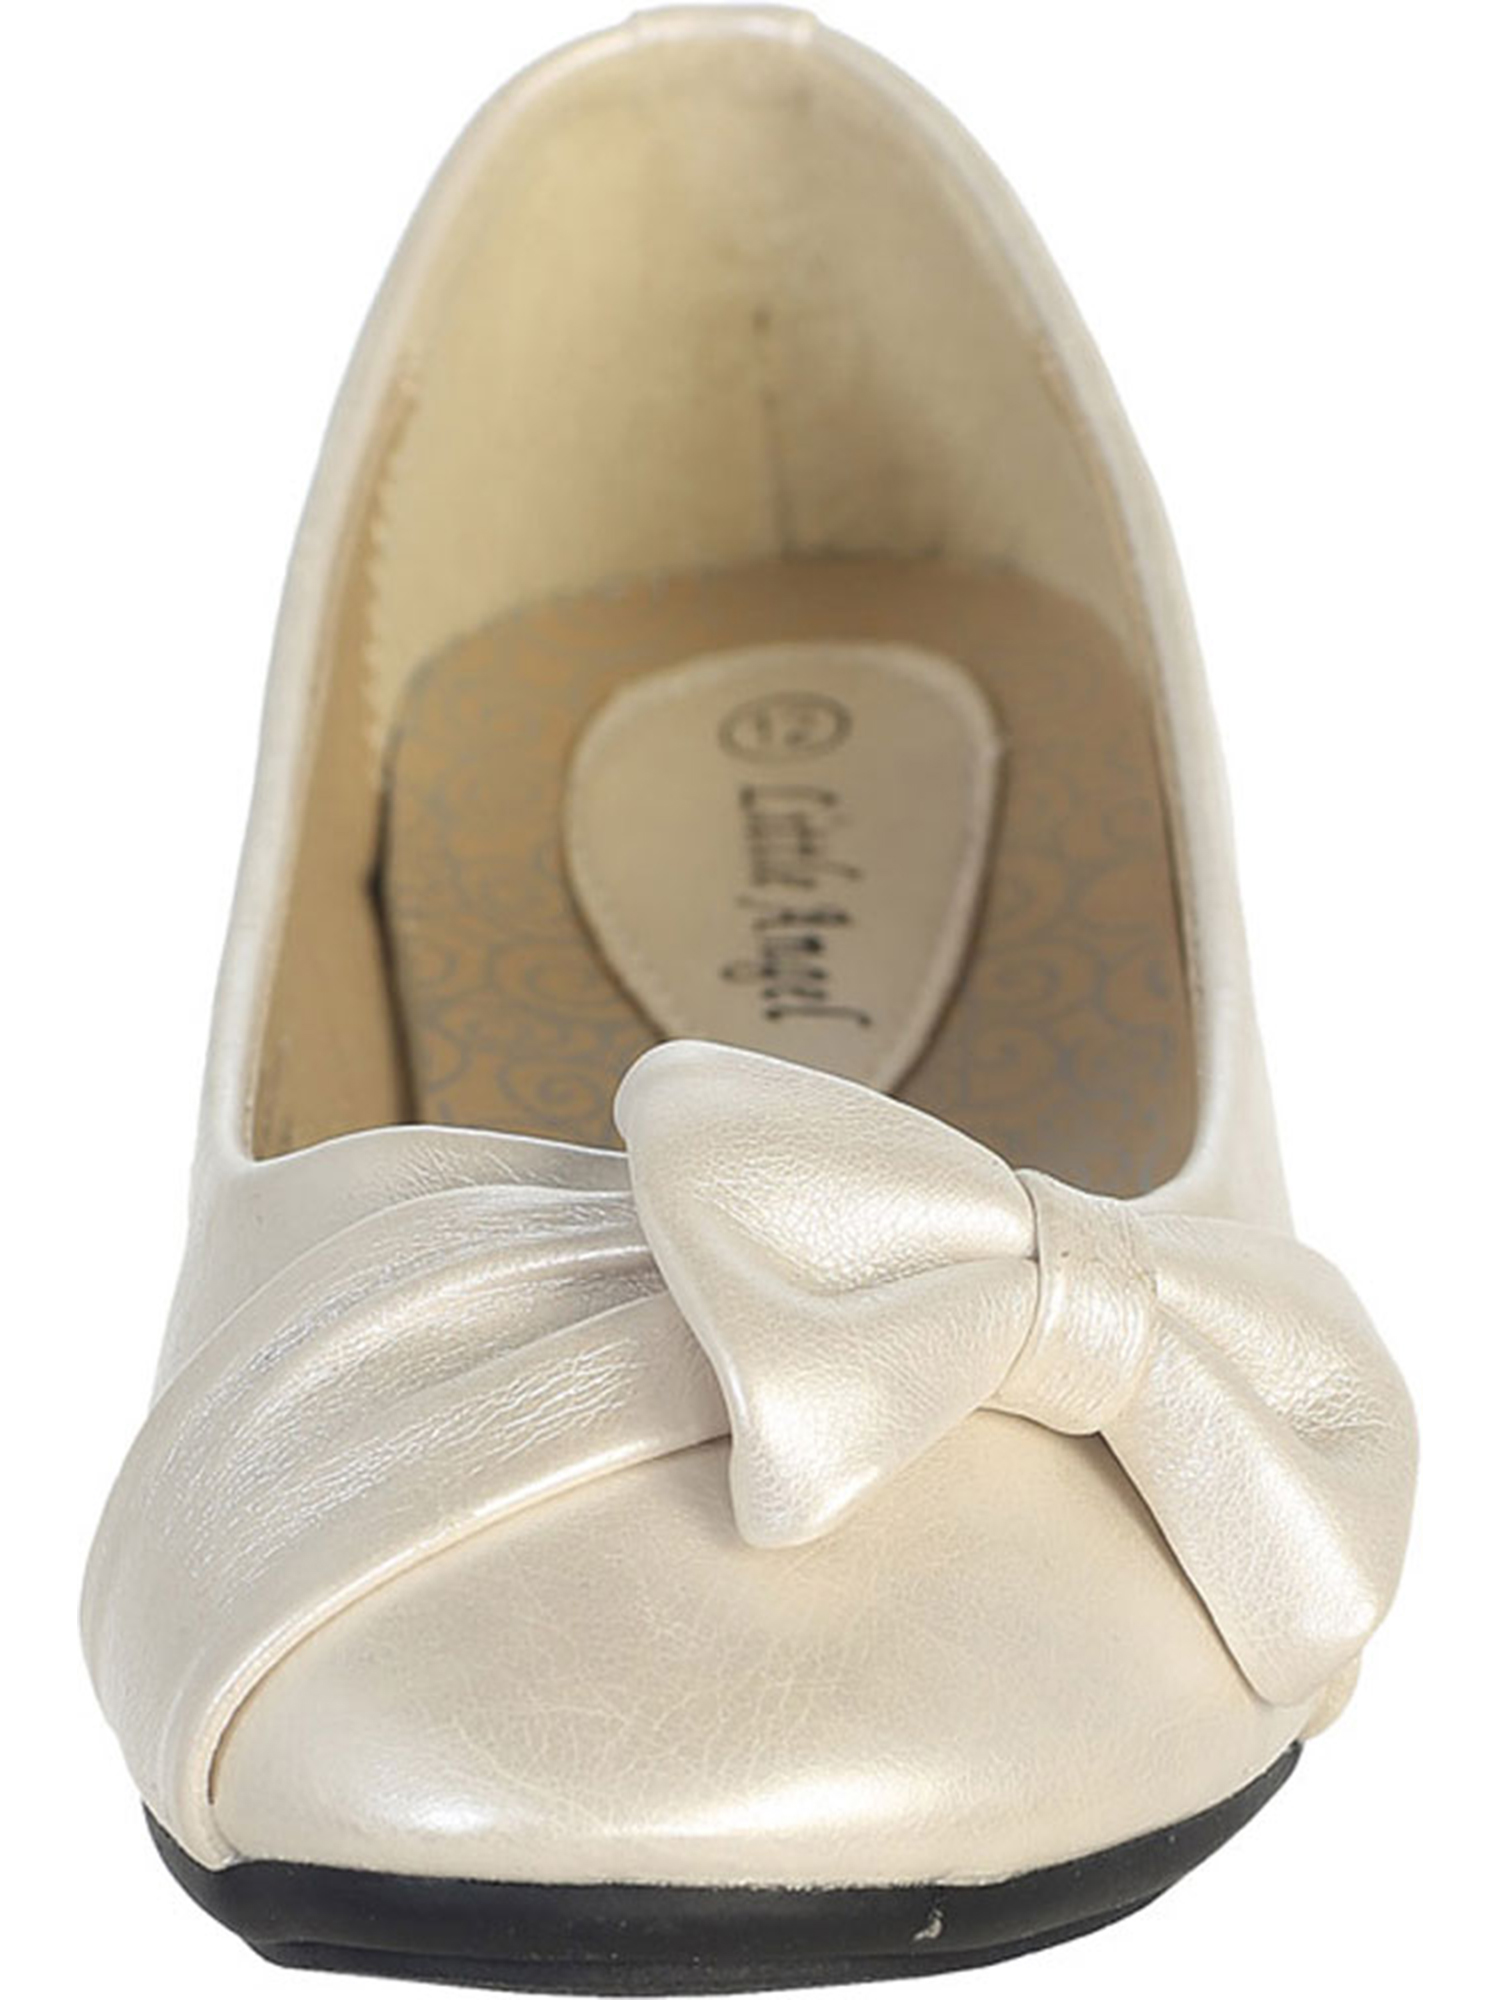 Ivory Pearl Girl's Flat Shoes with Side Bow Girl 11